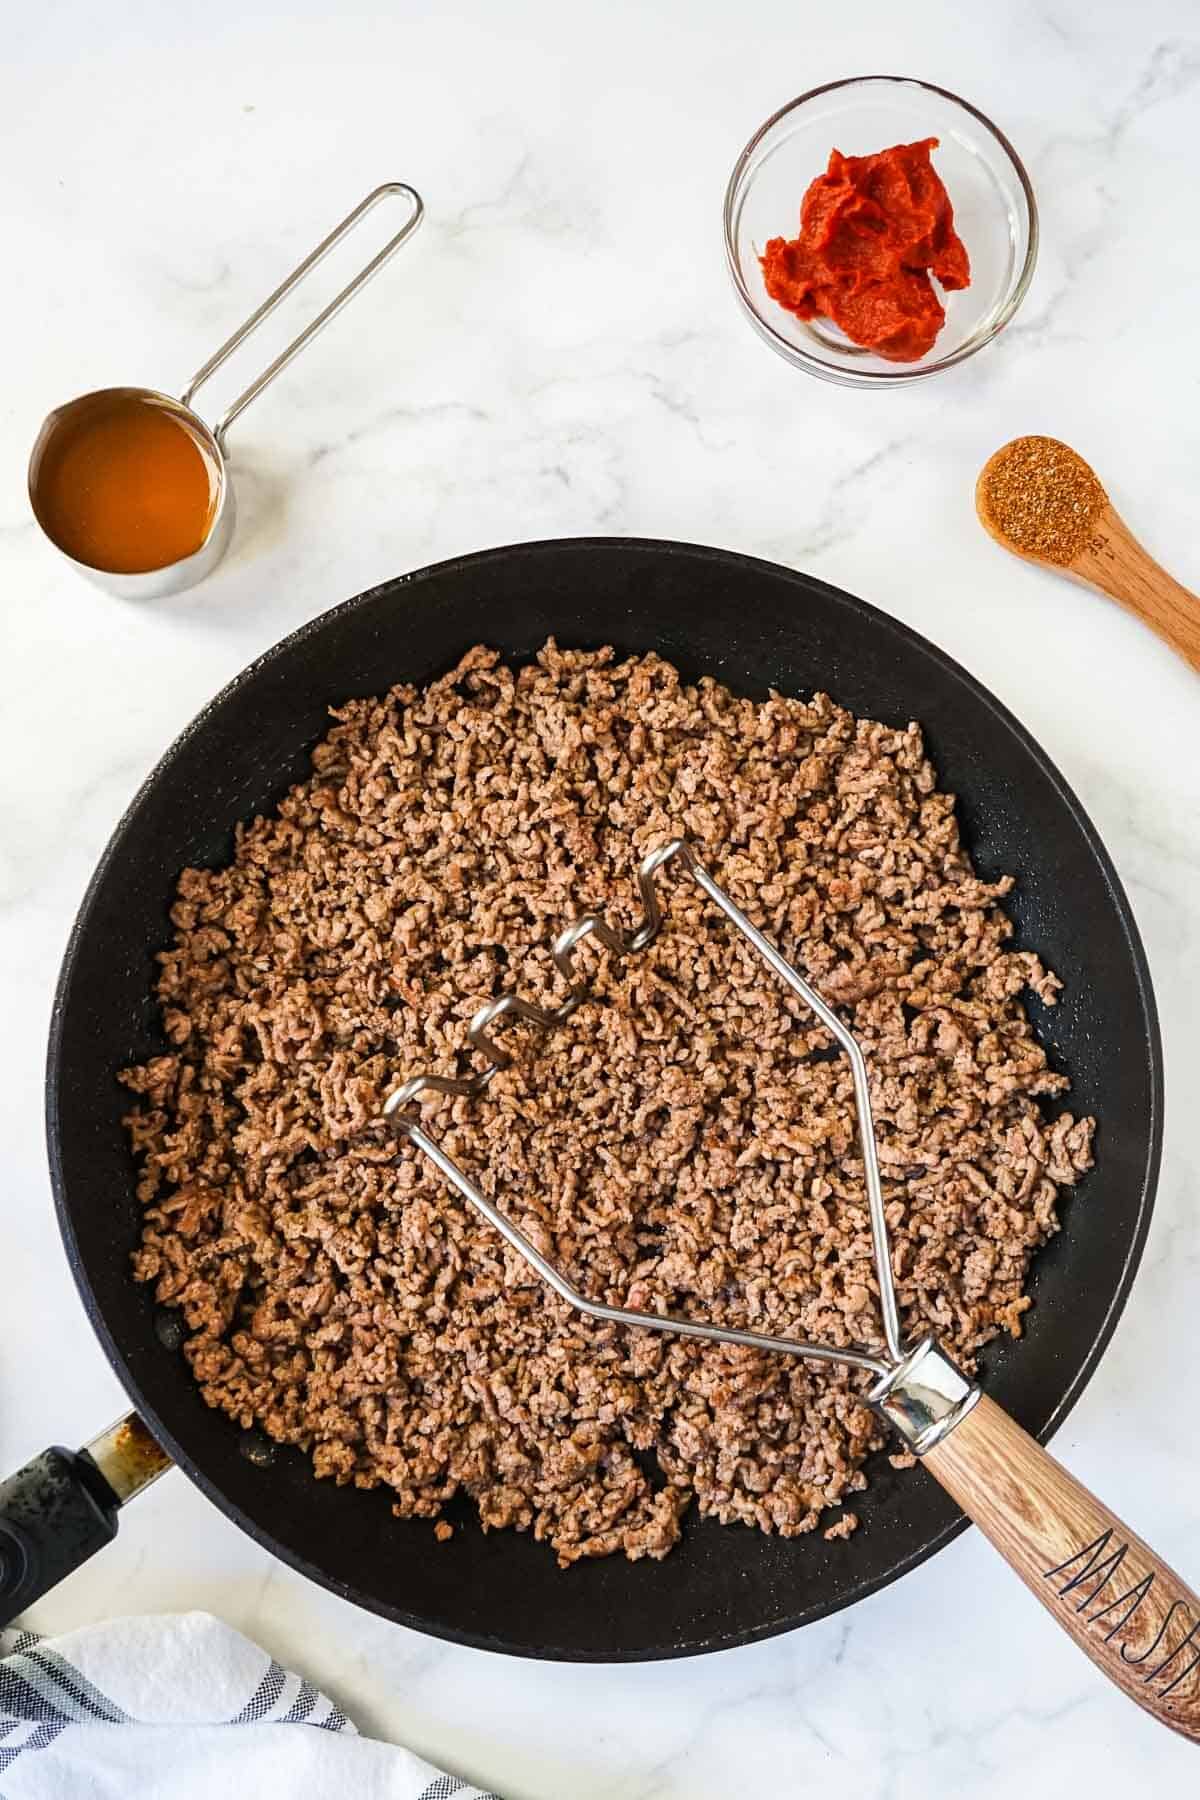 Ground beef in a skillet being cooked with a potato masher to get the meat broken up.